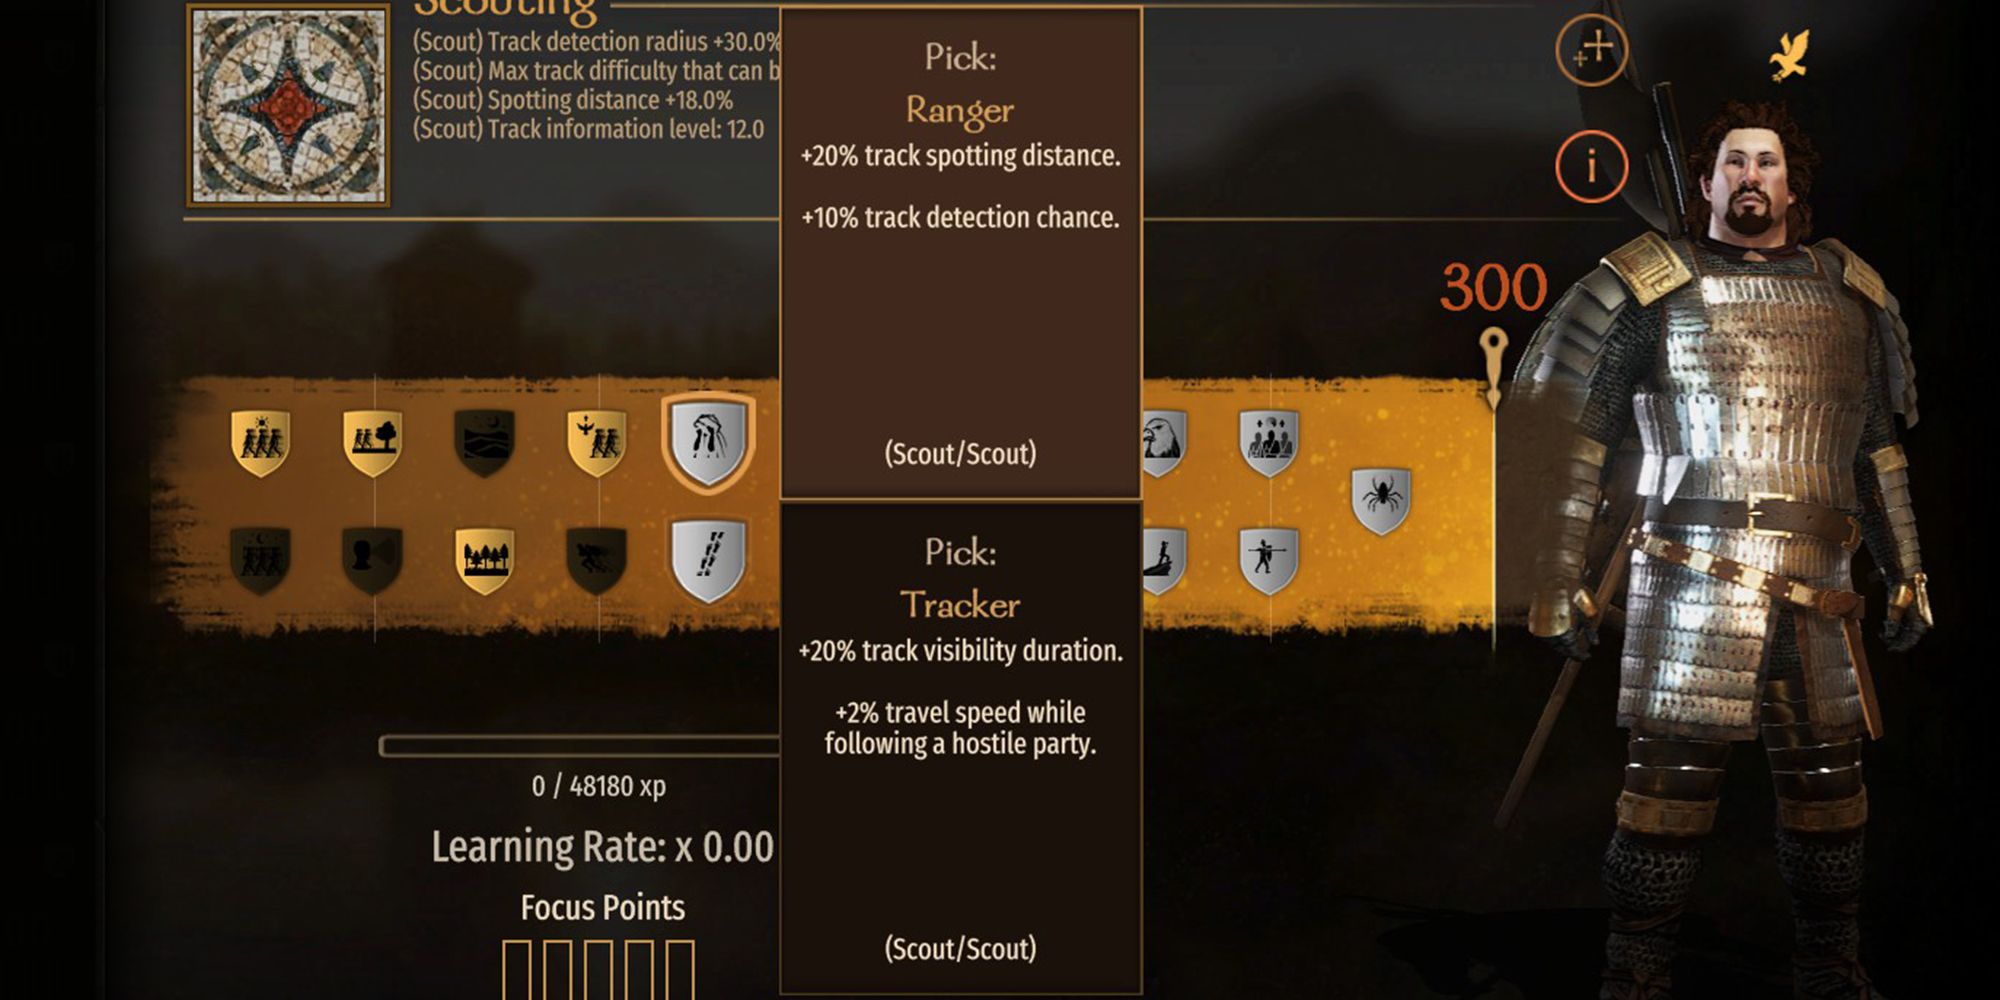 Mount & Blade 2: Bannerlord Tracker Perk: +20% tracking visibility duration.  +2% movement speed while following a hostile party.